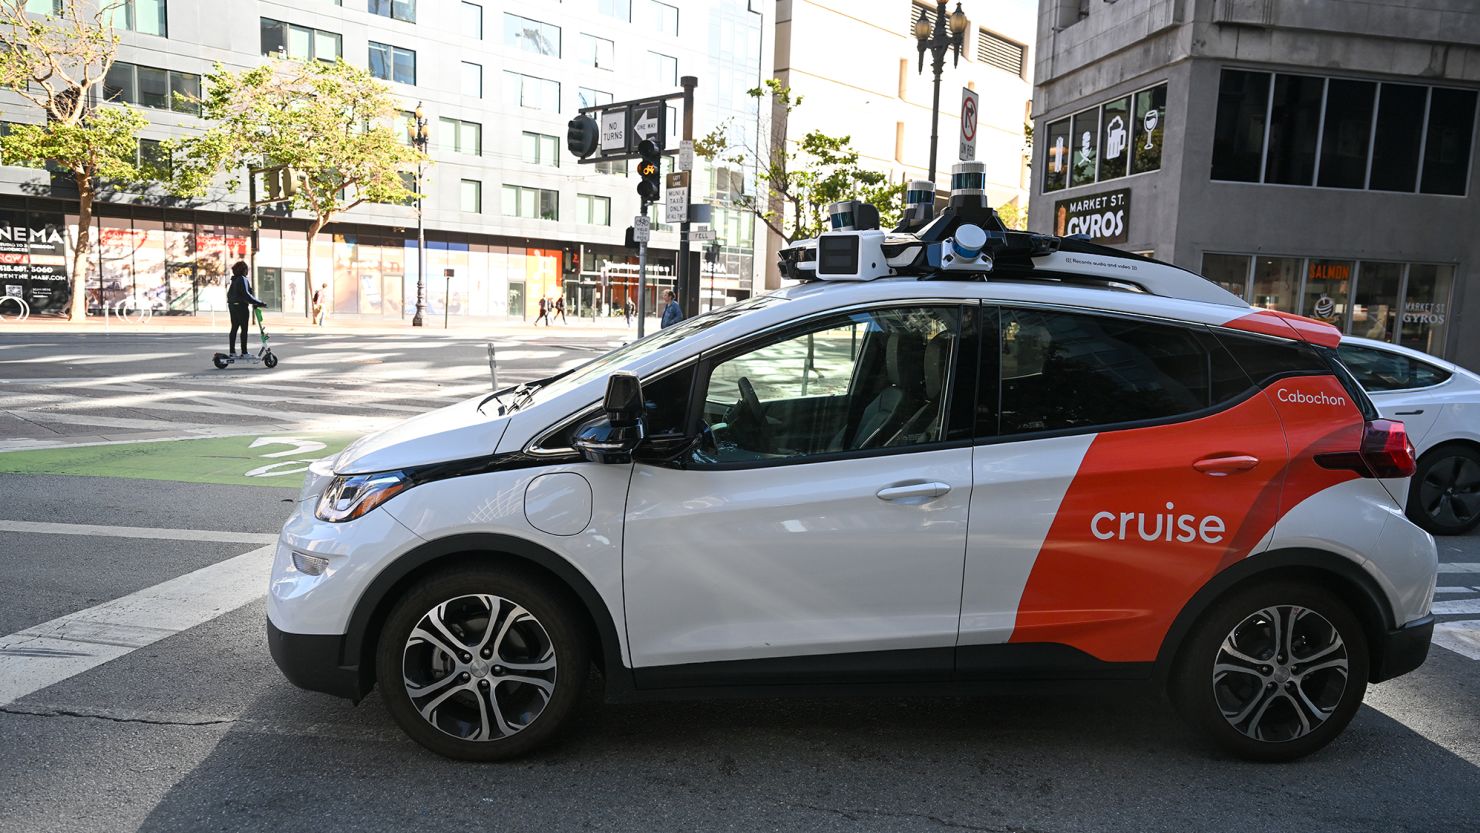 A Cruise, which is a driverless robot taxi, is seen during operation in San Francisco, California, on July 24, 2023.